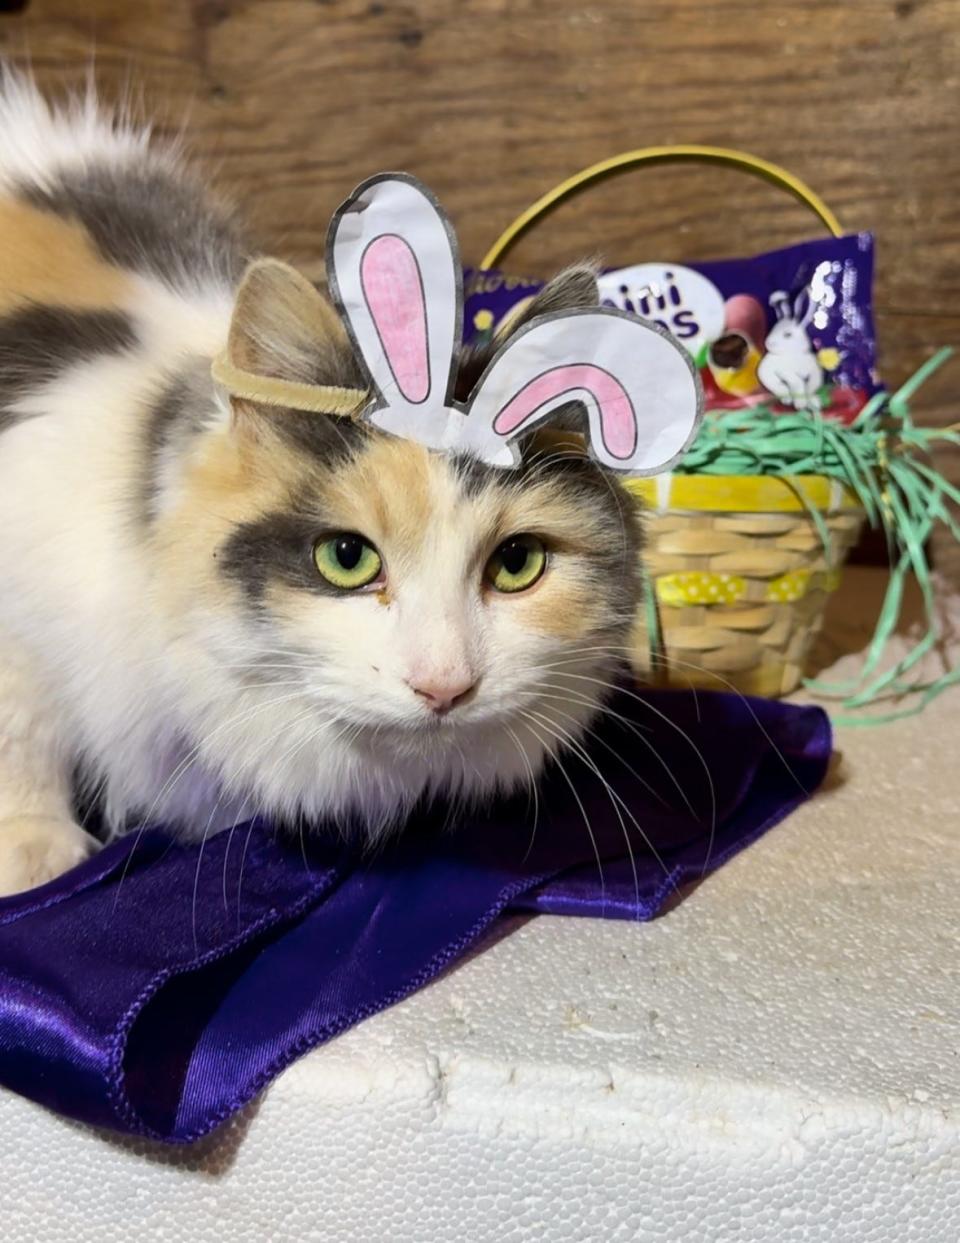 Violet, a barn cat at Lacy Geisler's farm, is also in the running to star in the Easter-bunny theme ad campaign for Cadbury.